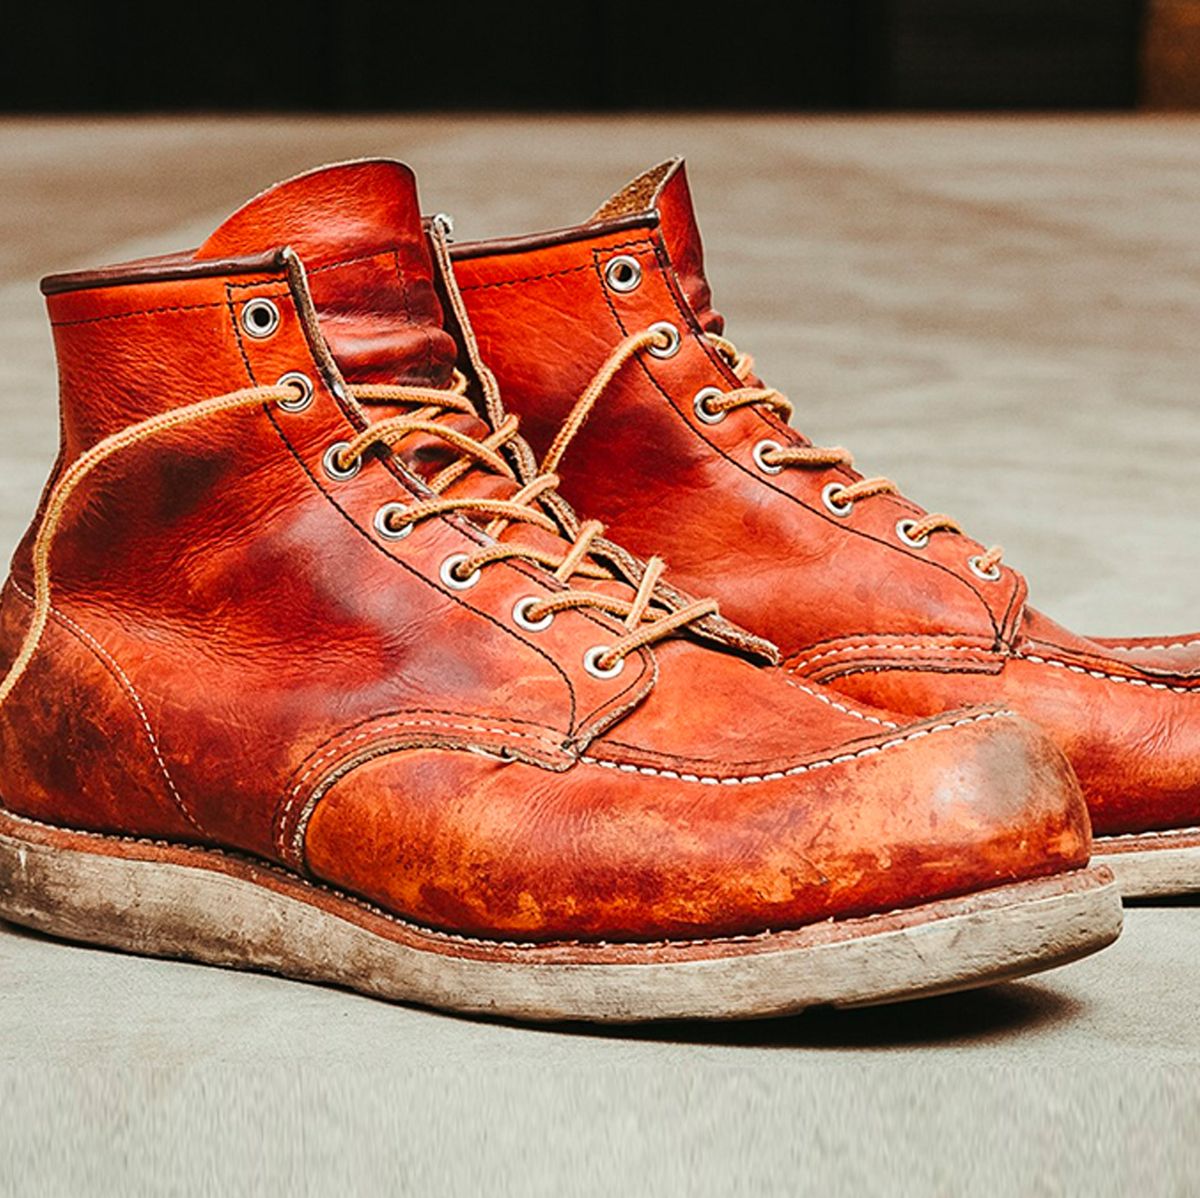 Red Wing Heritage Iron Ranger Boots Style No. 8085 Review